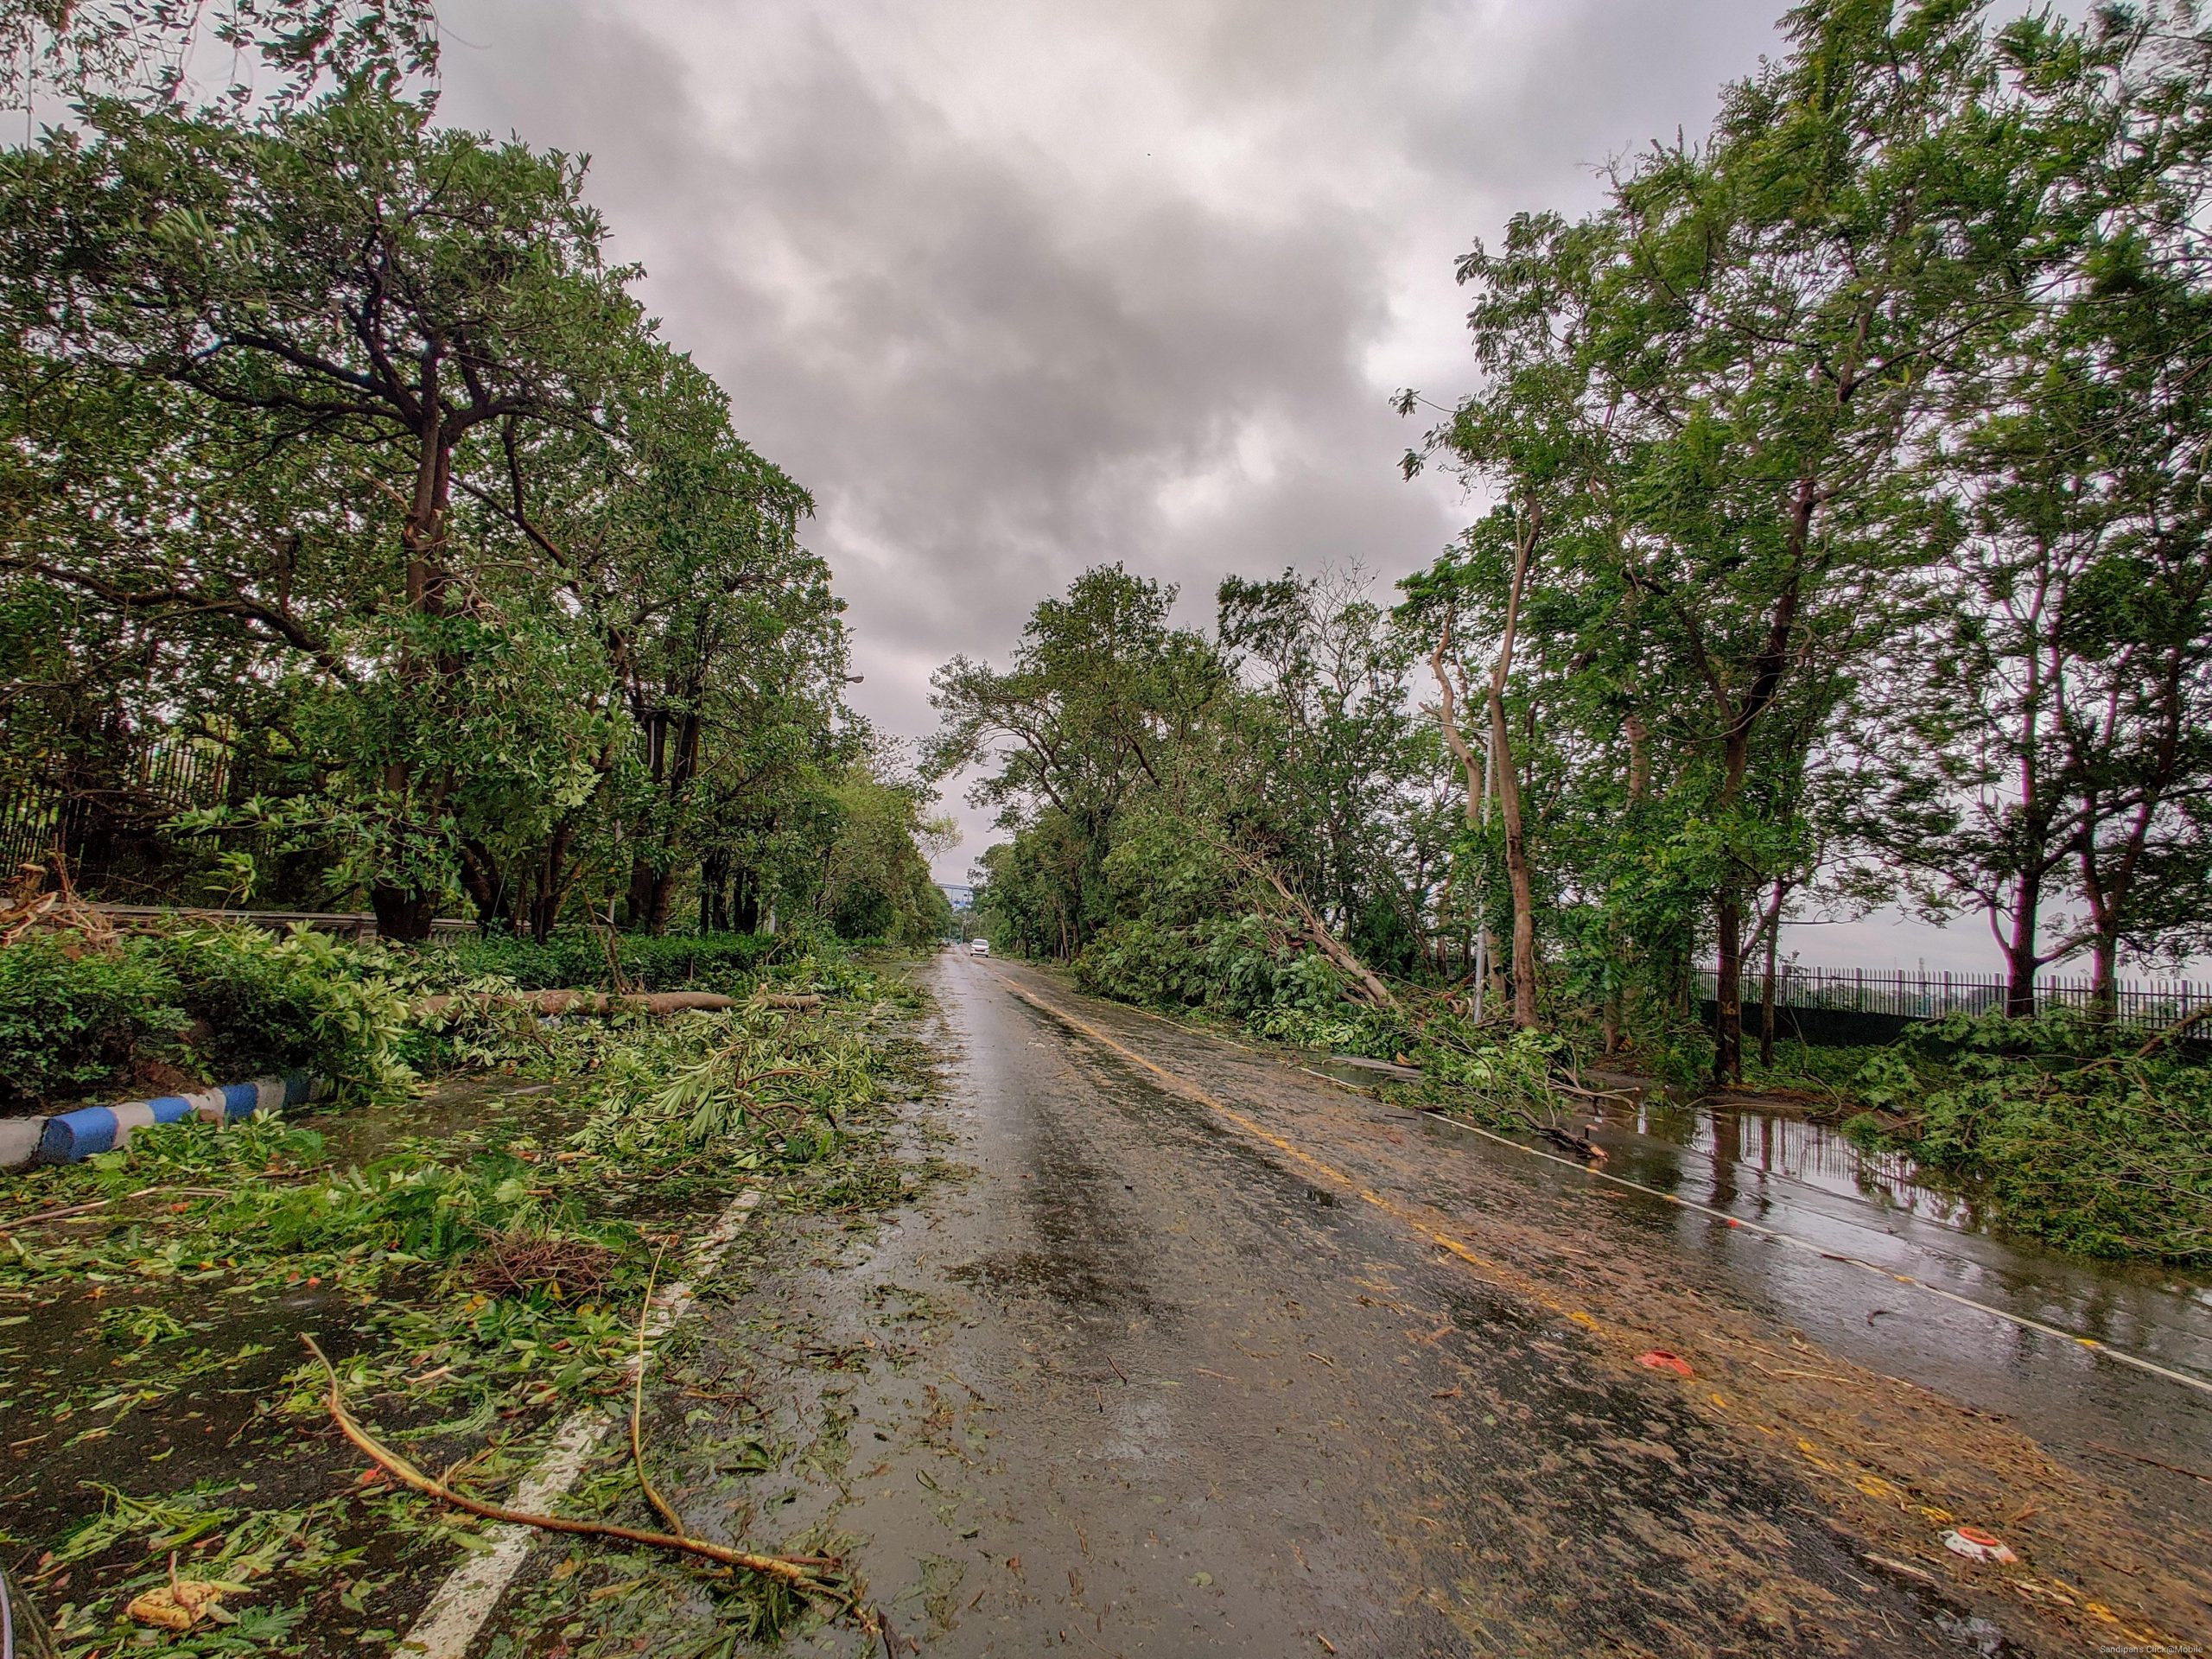 Trees fallen on road after rain storm